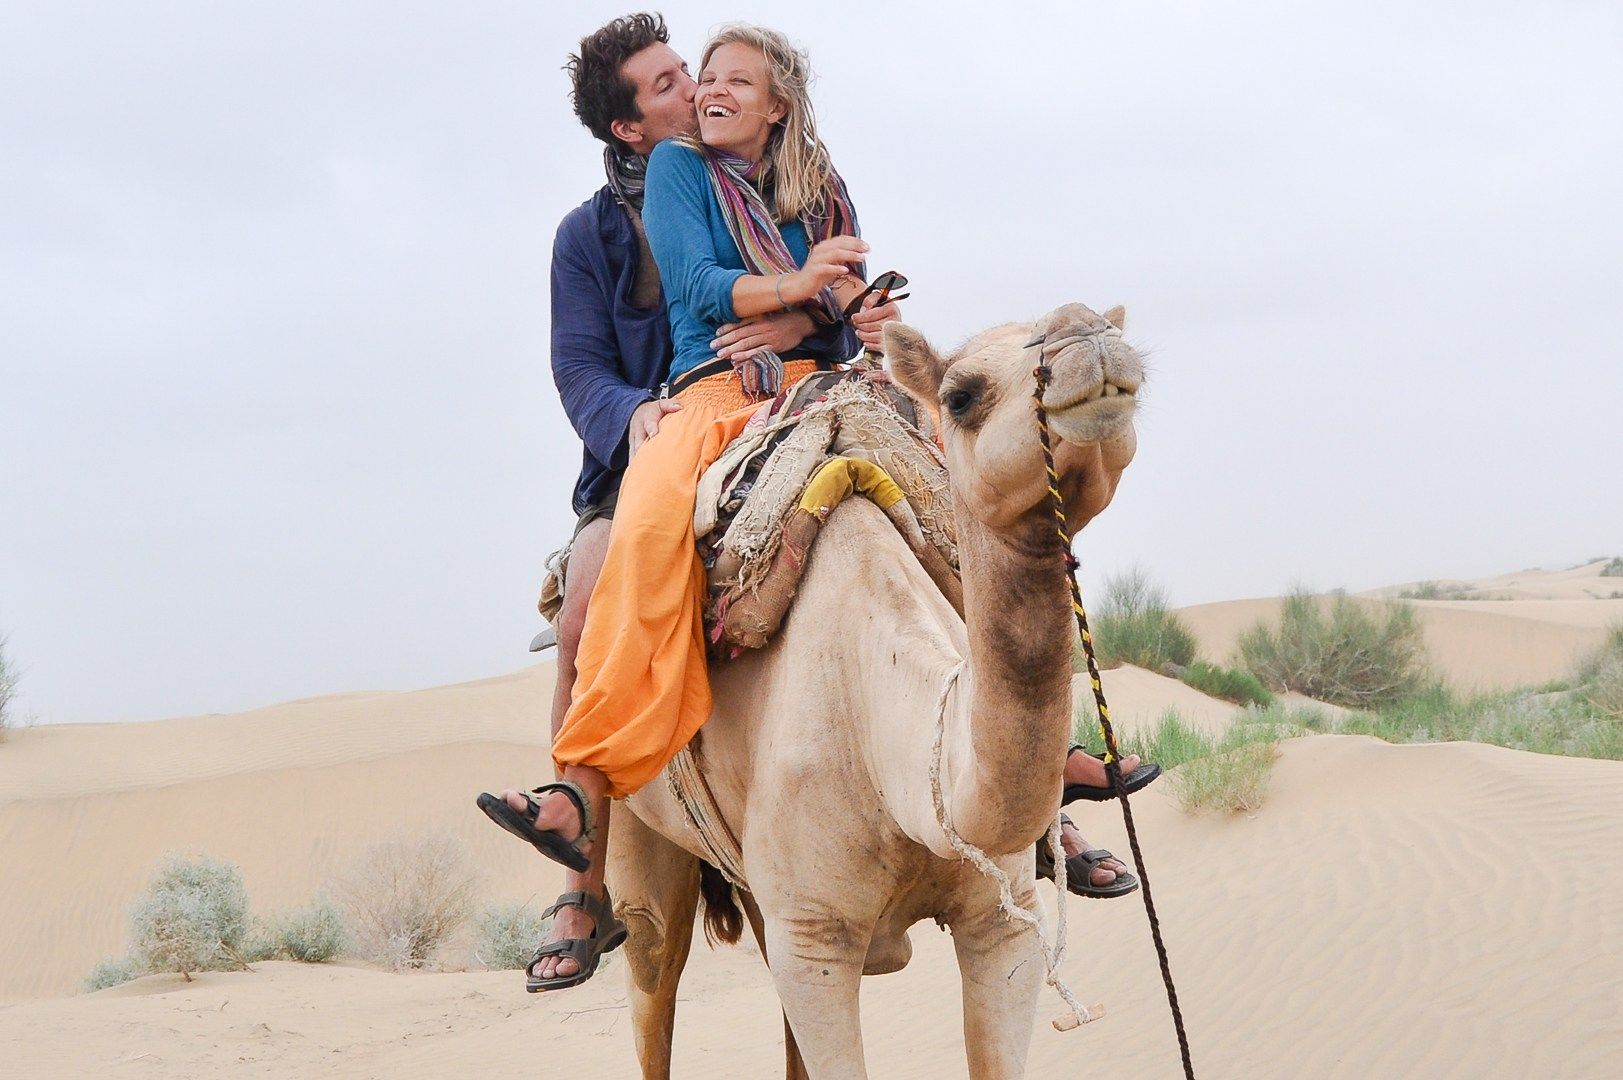 Ernie with his wife on their camel safari in the Thar Desert.